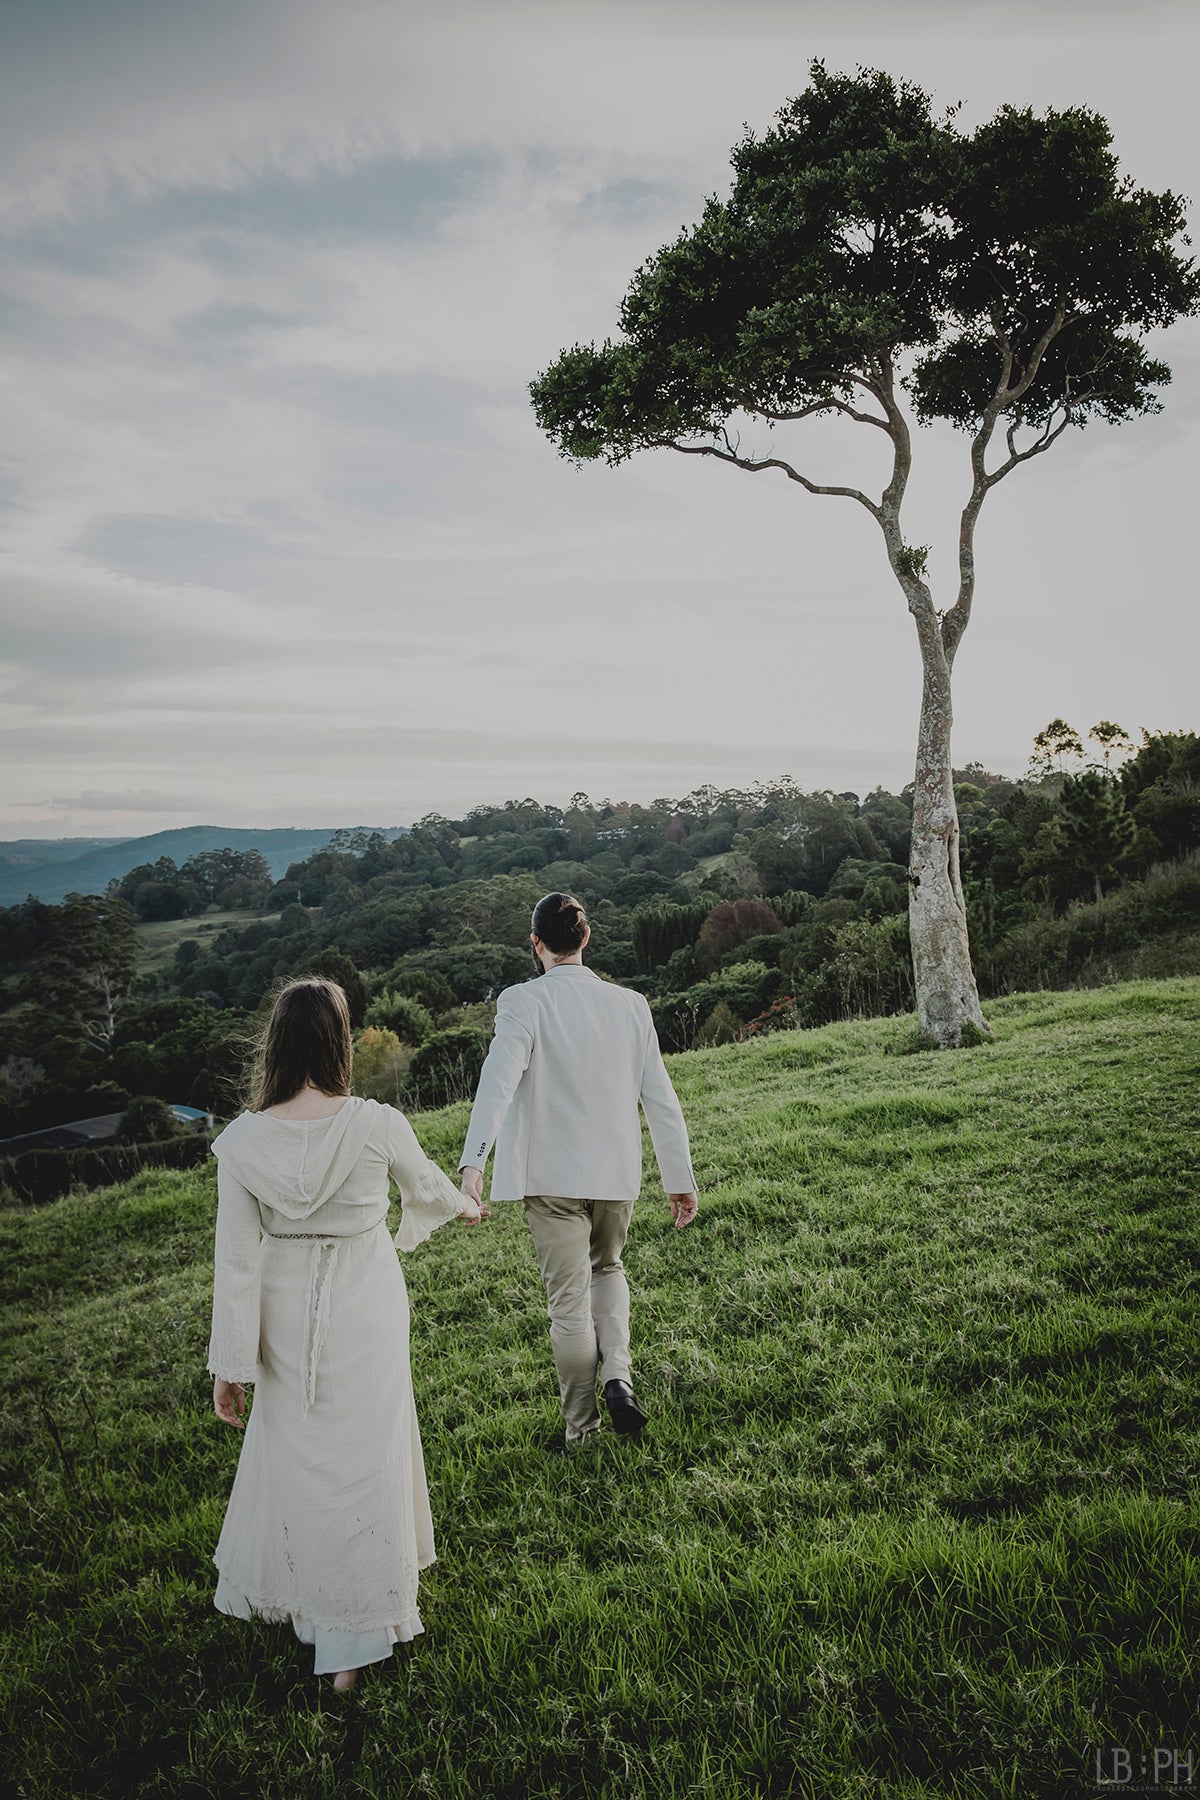 Eden Tree Eco Co-Creators Dan & Candice Kennedy walk hand in hand towards tree at One Tree Hill, Maleny, Queensland. Photo by Lauren Biggs Photography.